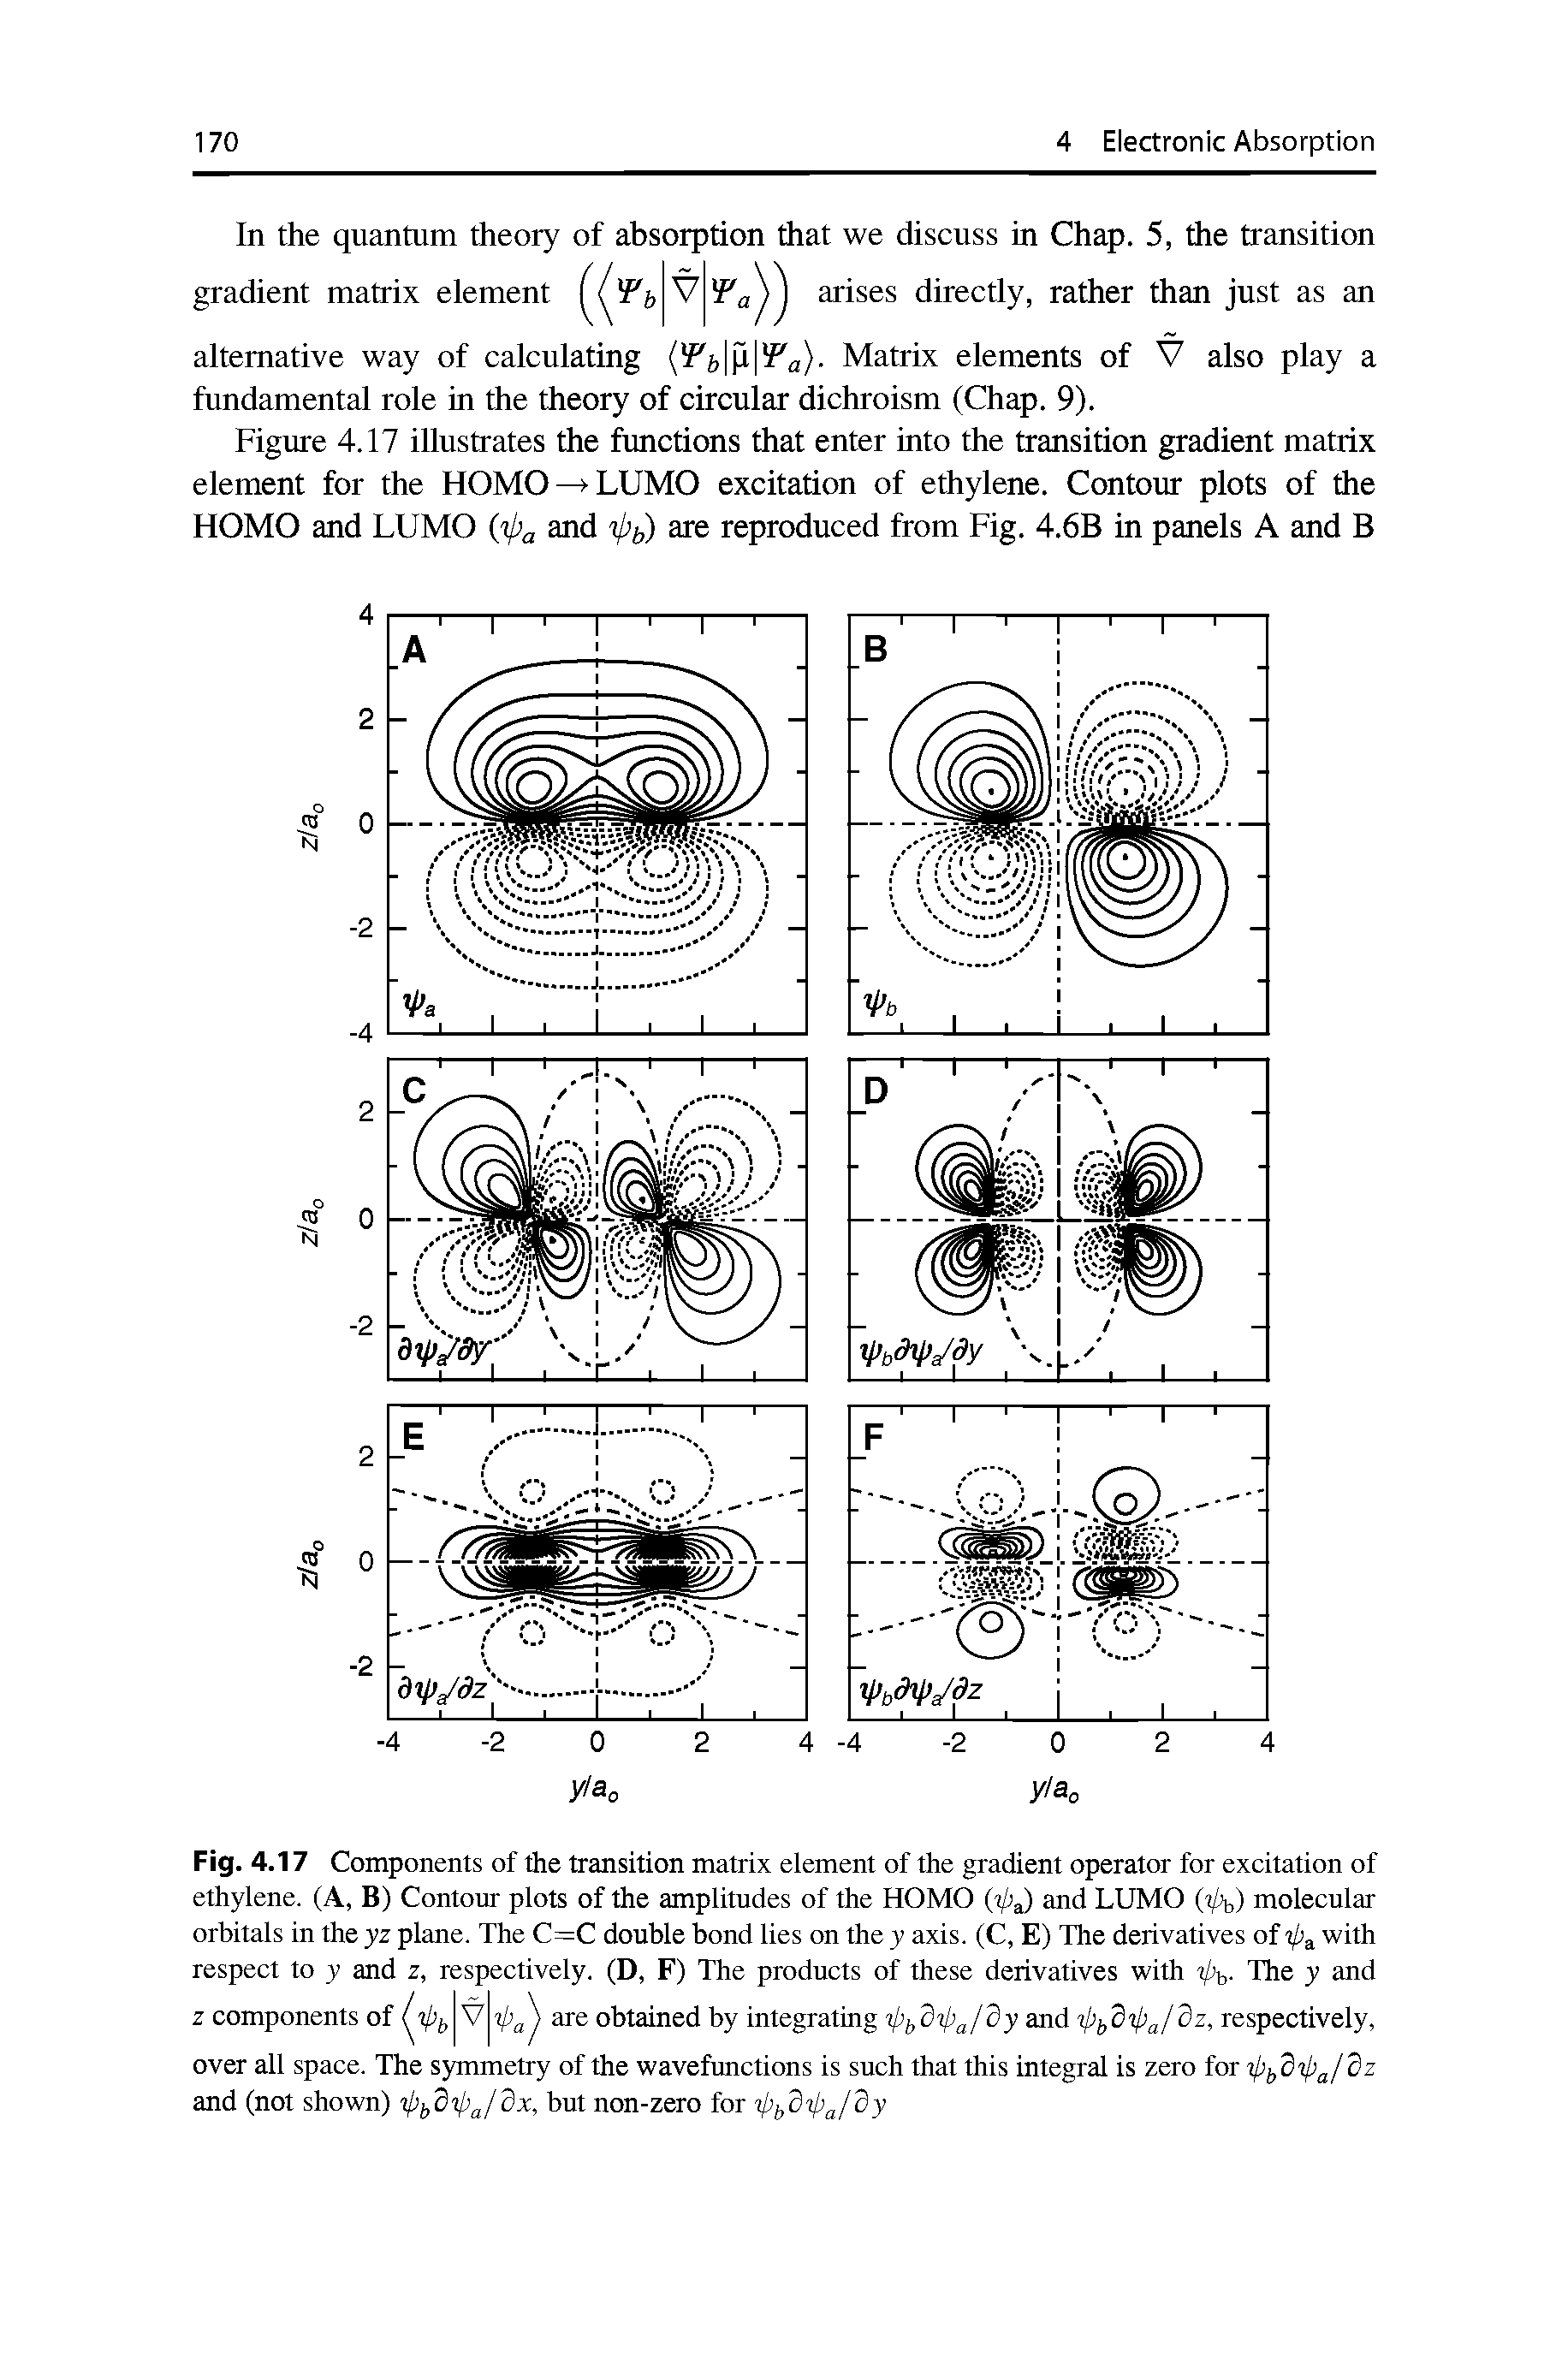 Fig. 4.17 Components of the transition matrix element of the gradient operator for excitation of ethylene. (A, B) Contour plots of the amplitudes of the HOMO and LUMO molecular orbitals in the yz plane. The C=C double bond lies on the y axis. (C, E) The derivatives of with respect to y and z, respectively. (D, F) The products of these derivatives with The y and...